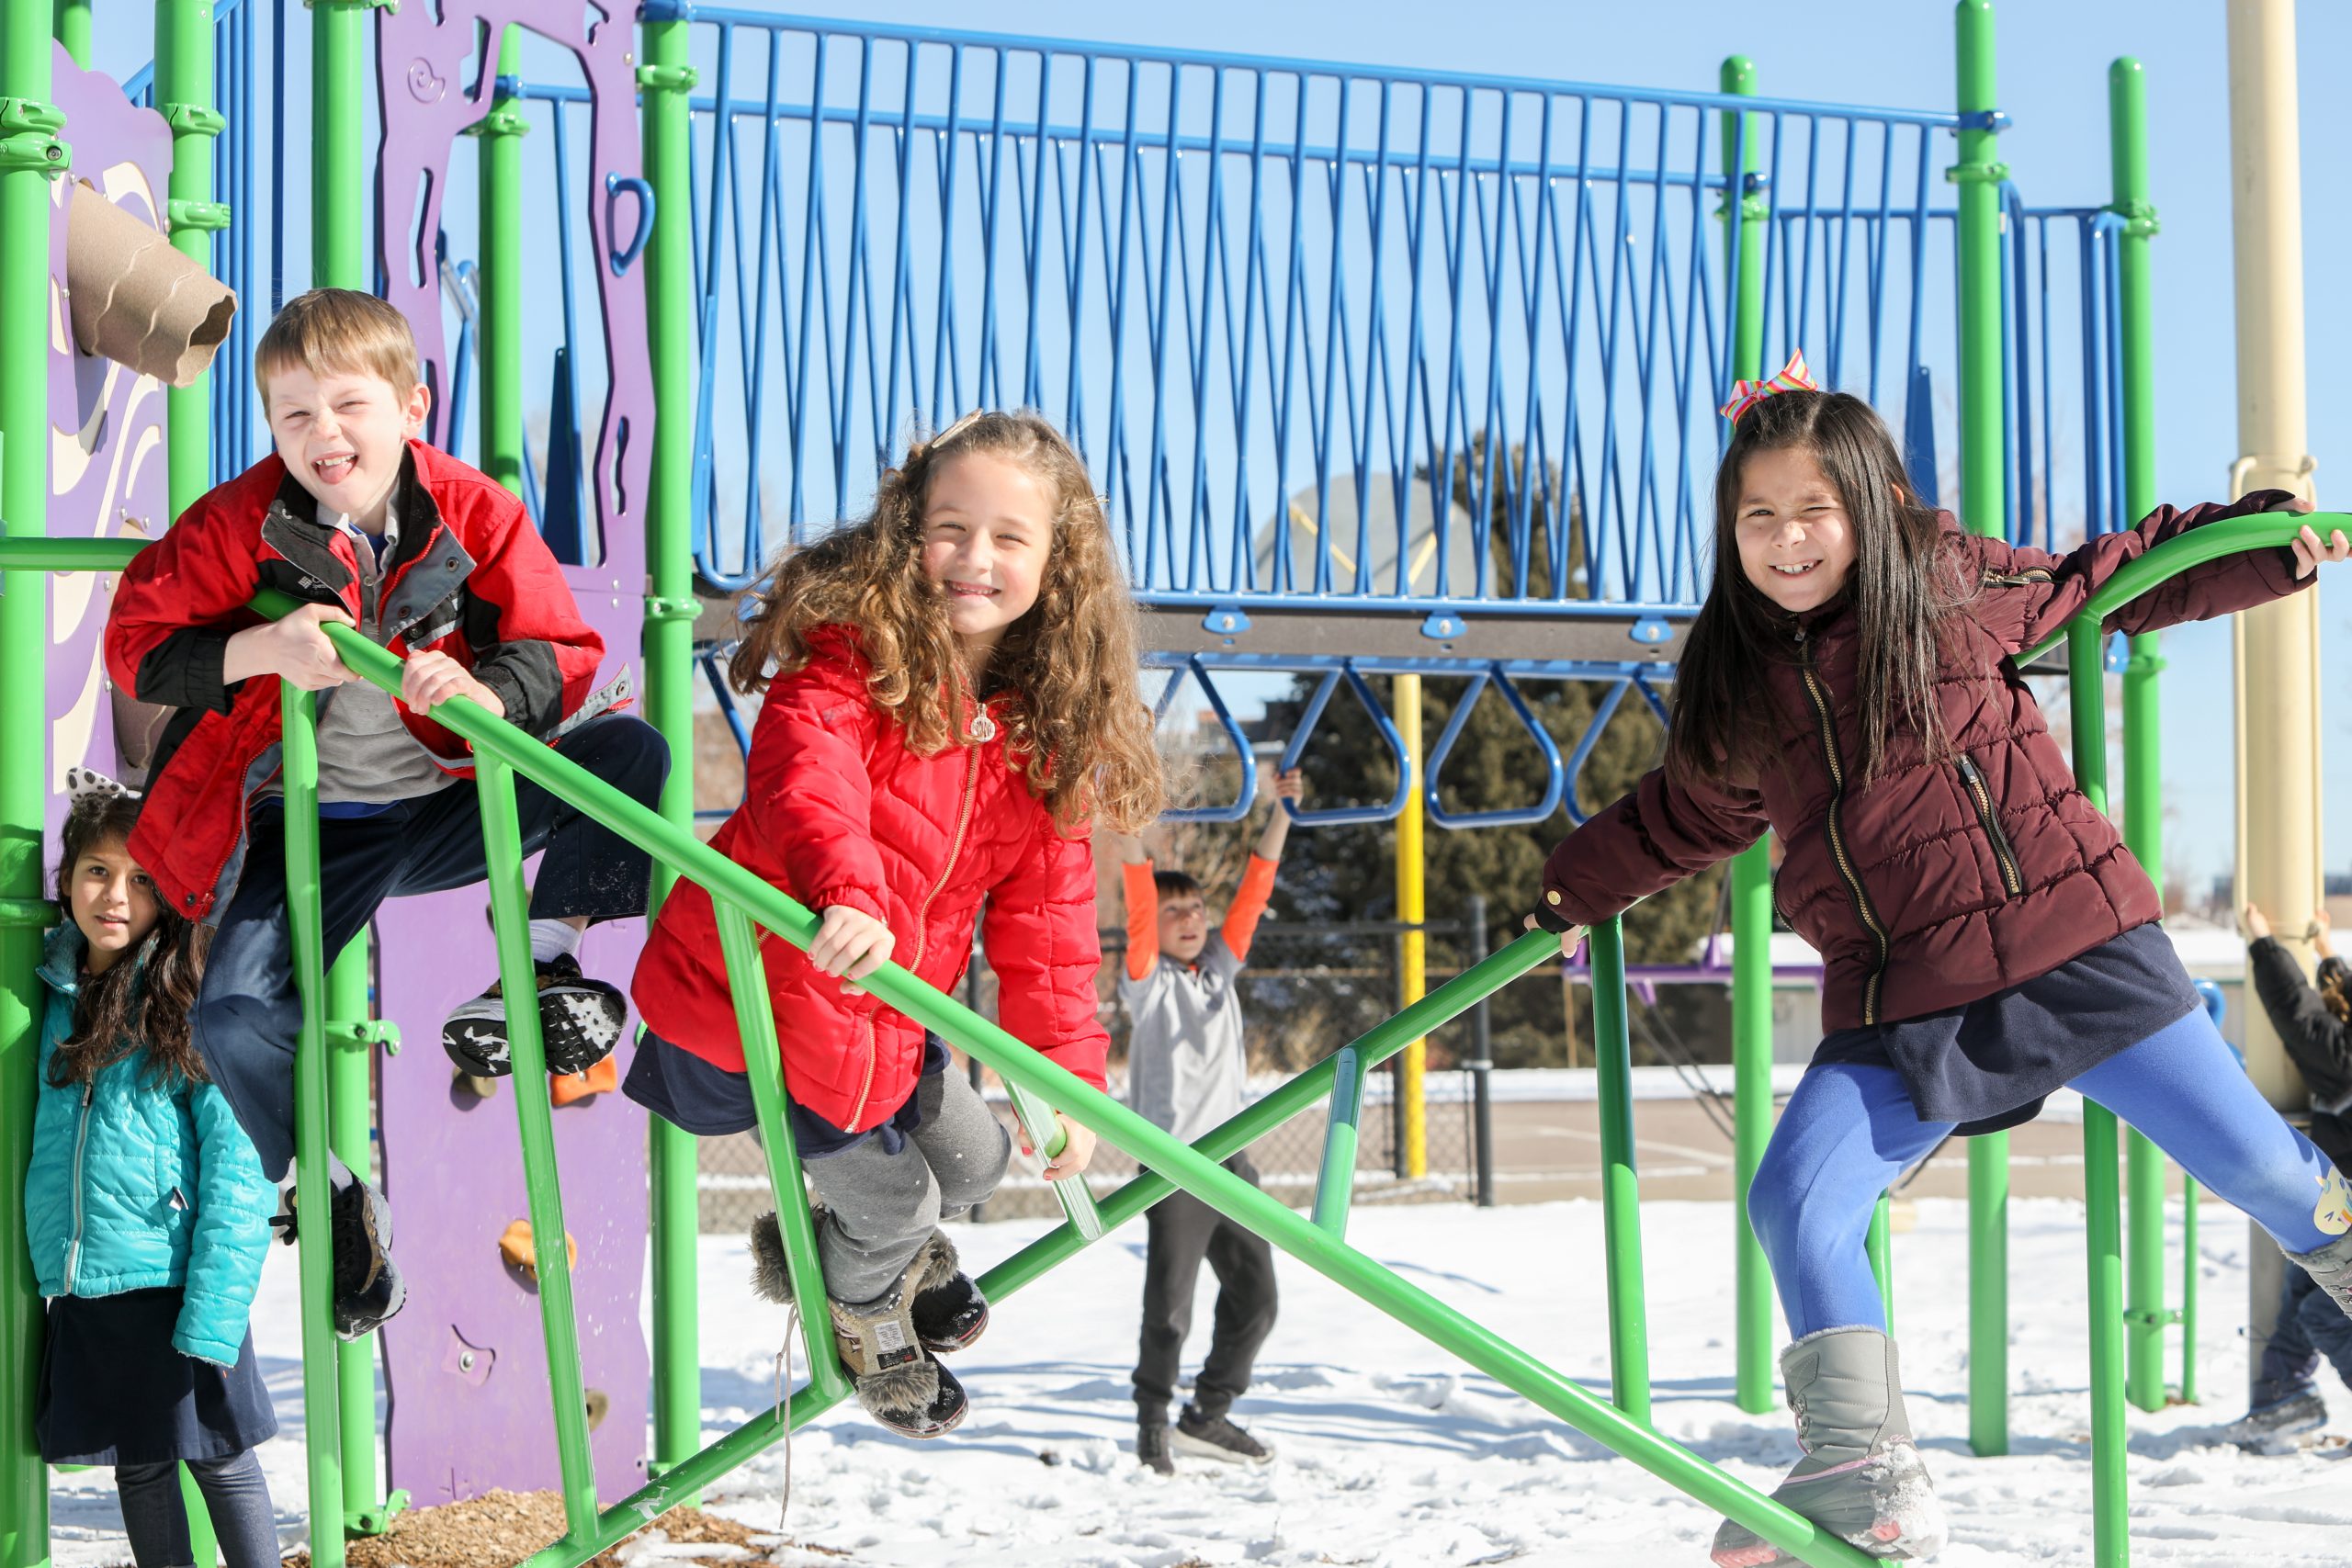 Image of students on playground equipment in the snow